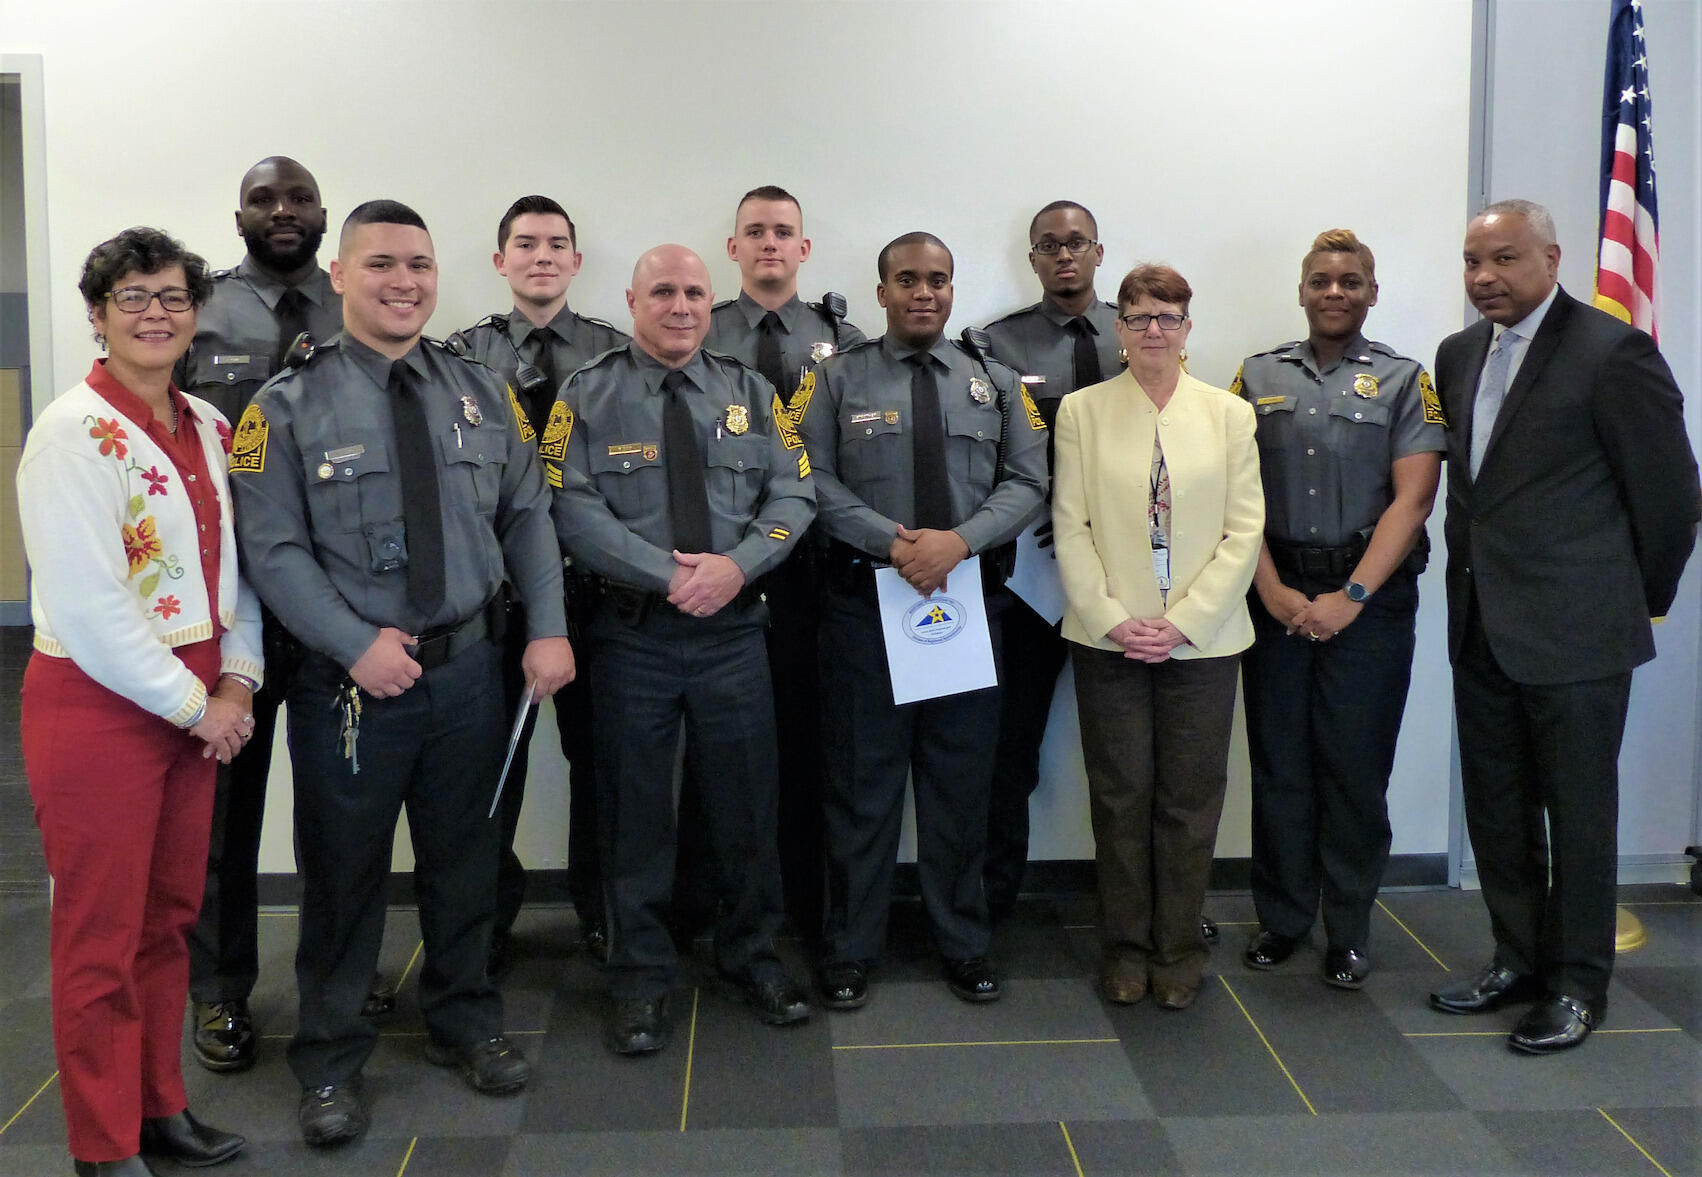 Nine people — six police officers and three non-uniformed people — pose for a photo.